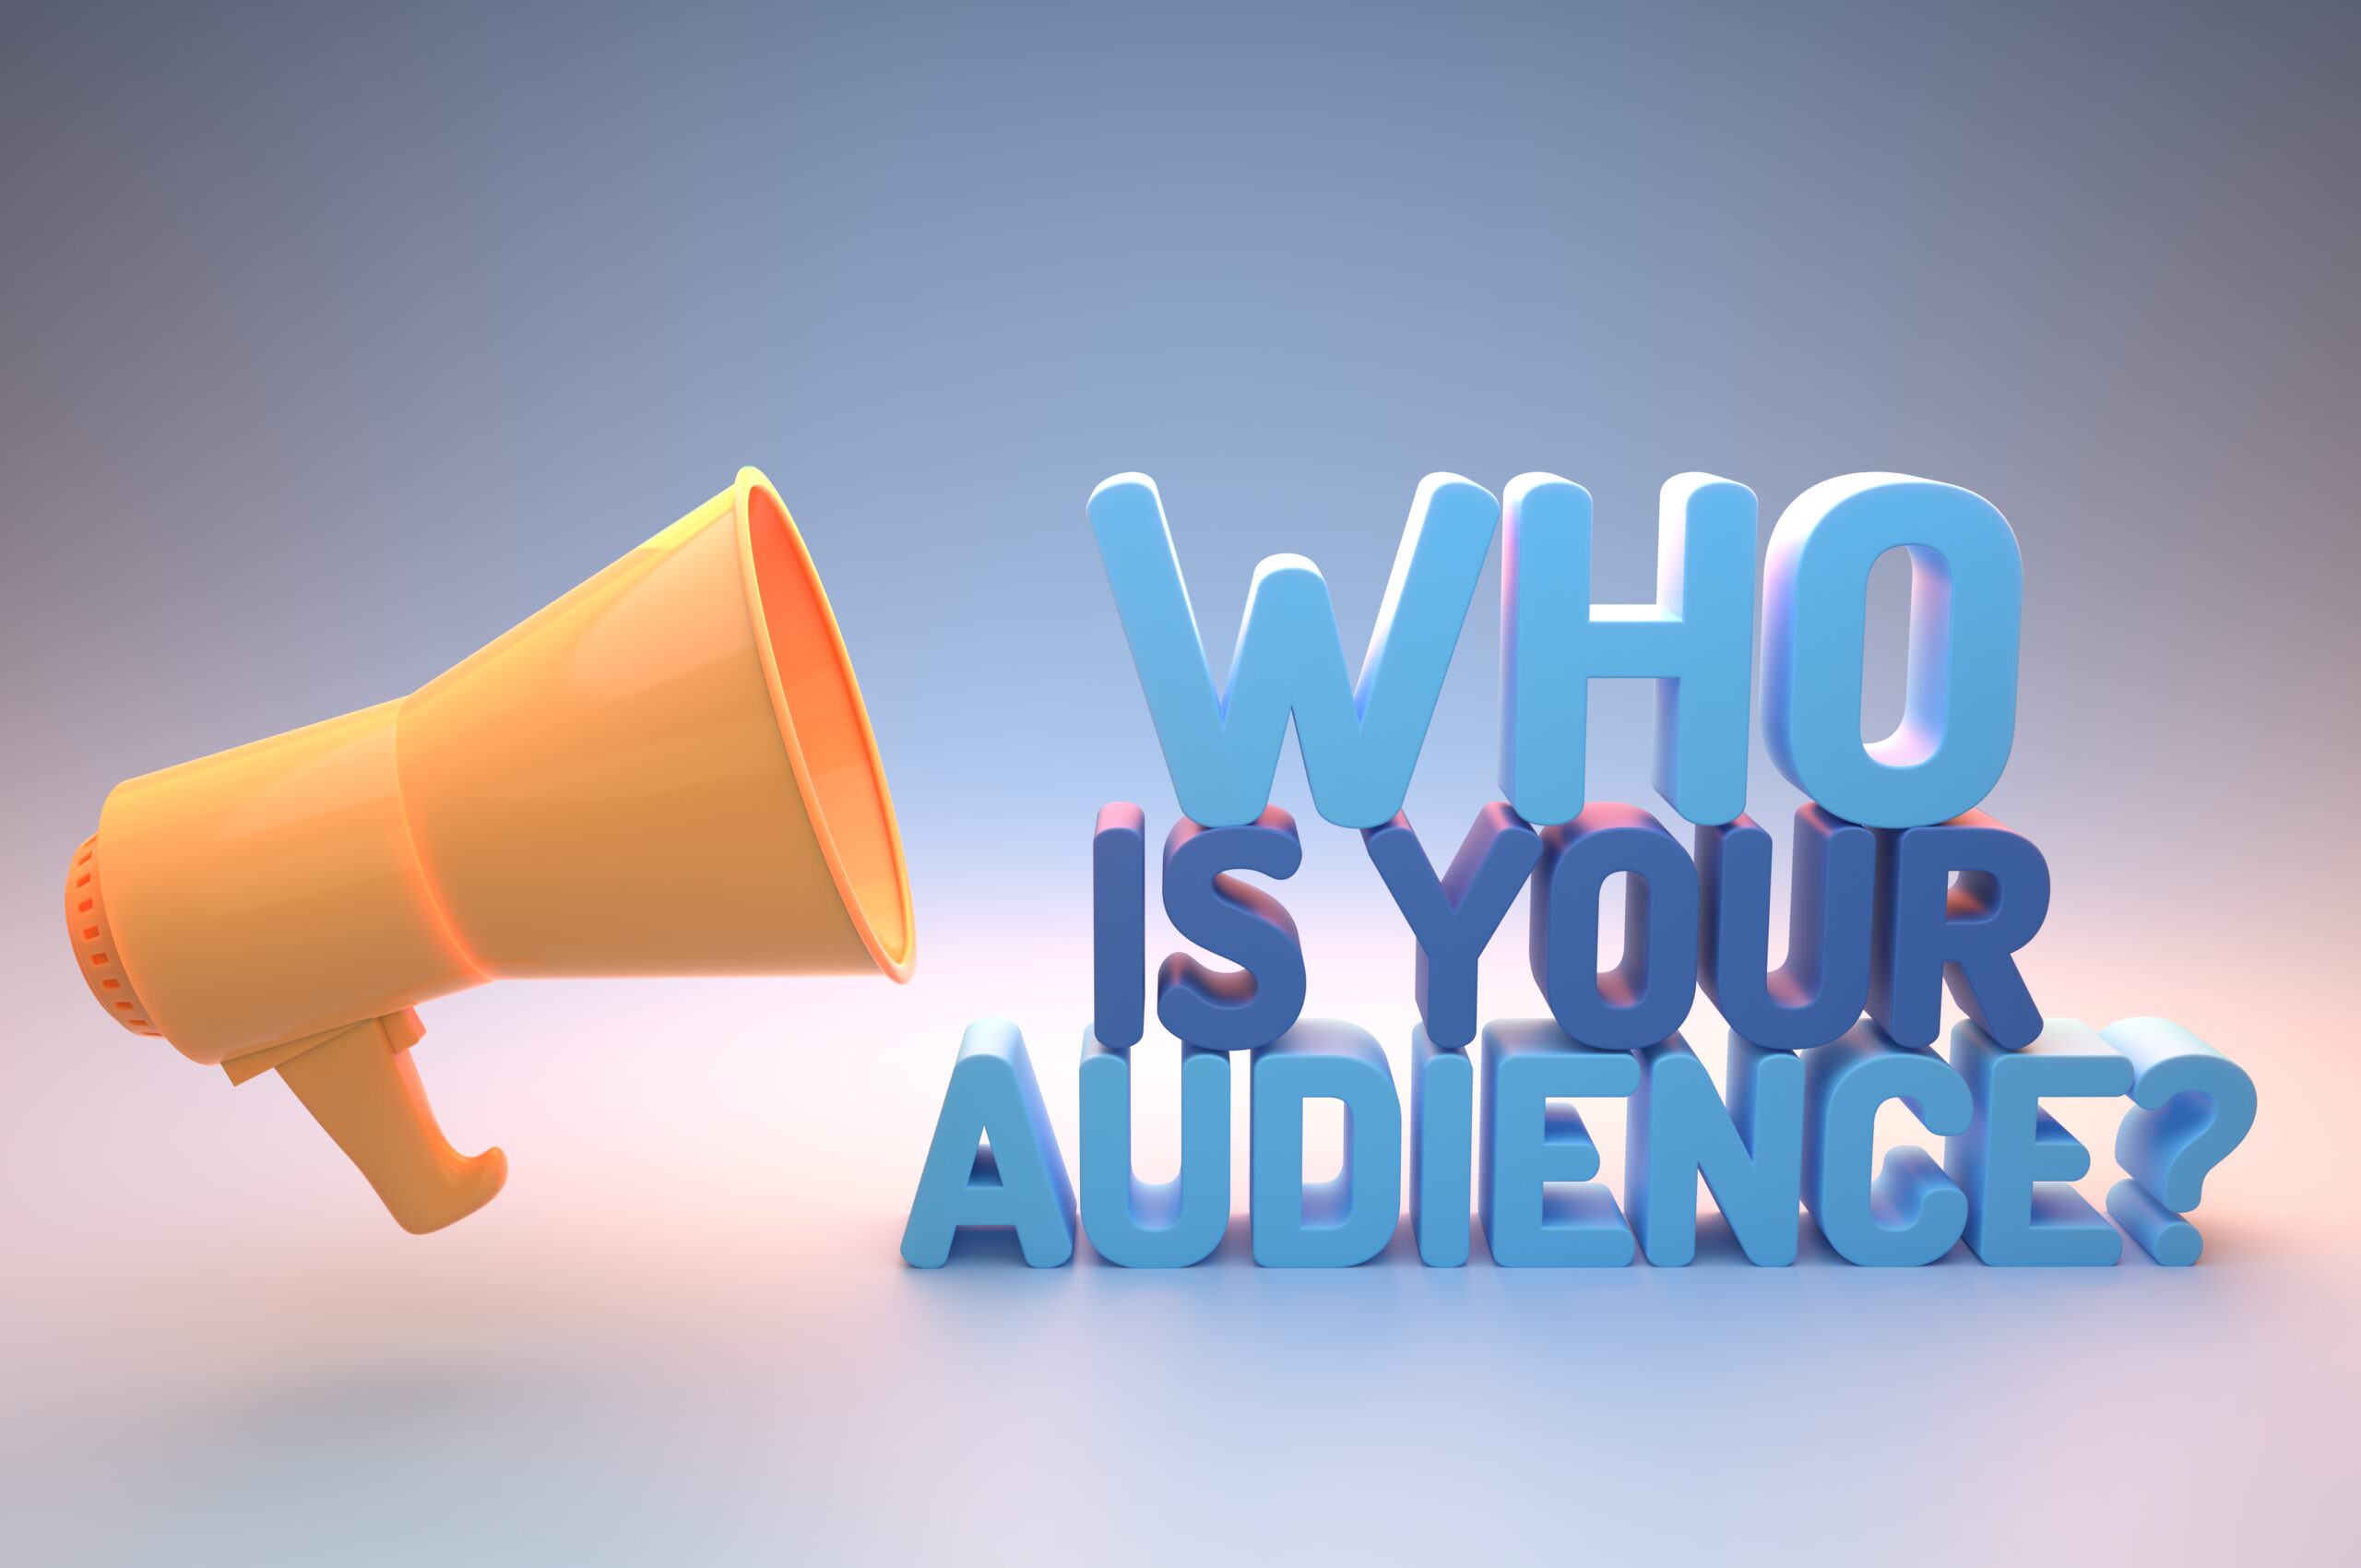 megaphone next to sign saying "who is your audience?" - identify your target audience